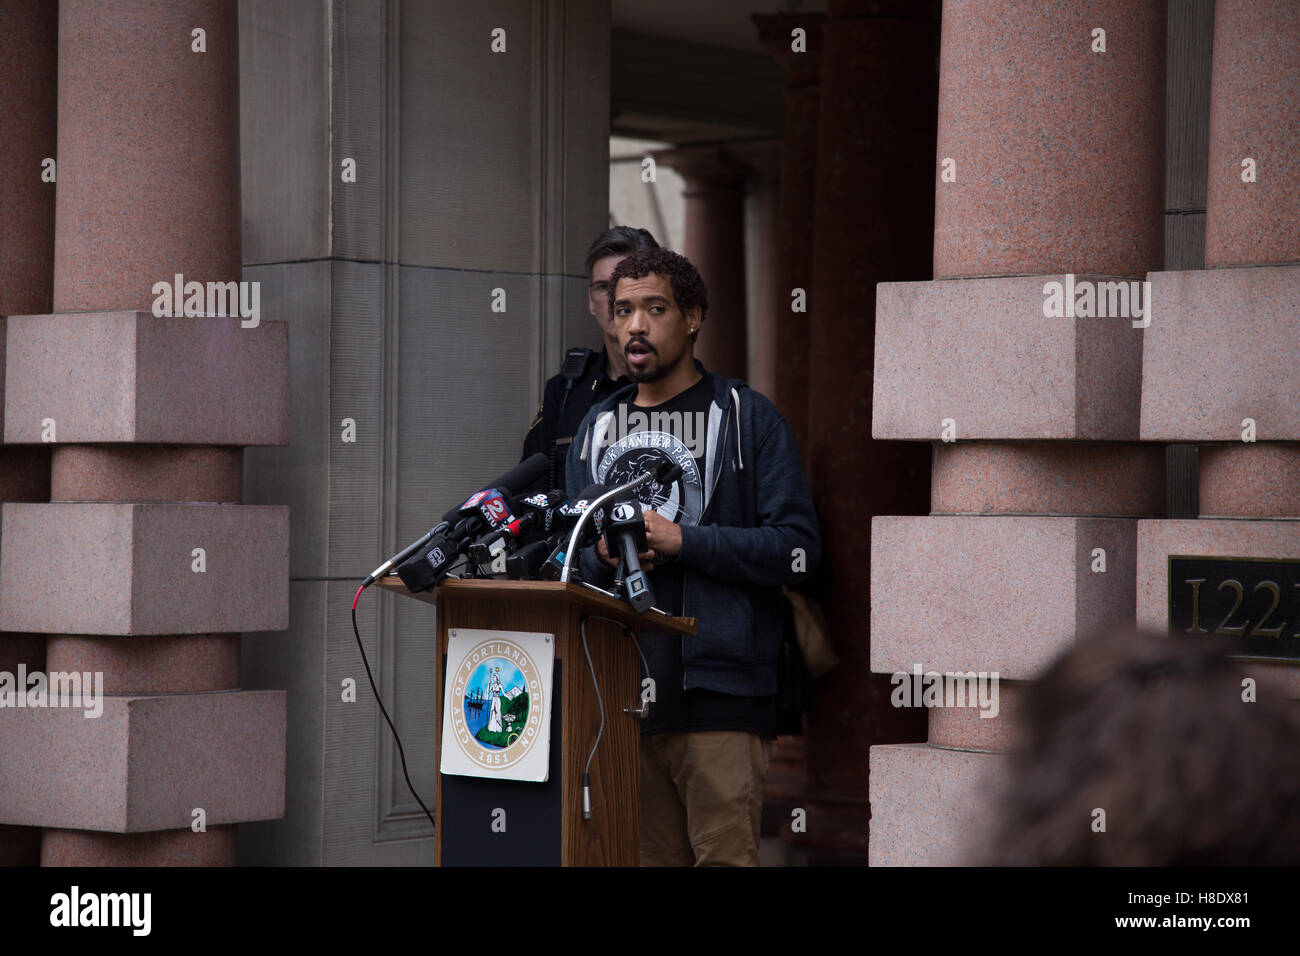 Portland, USA. 11th November, 2016. Portland Oregon 'Not My President' protest organizer speaks during a press conference urging people not to riot in the wake of the 2016 presidential election. Rioters have caused more than one million dollars in damages to the city of Portland during the 'Not My President' protests. Credit:  Joshua Rainey/Alamy Live News. Stock Photo